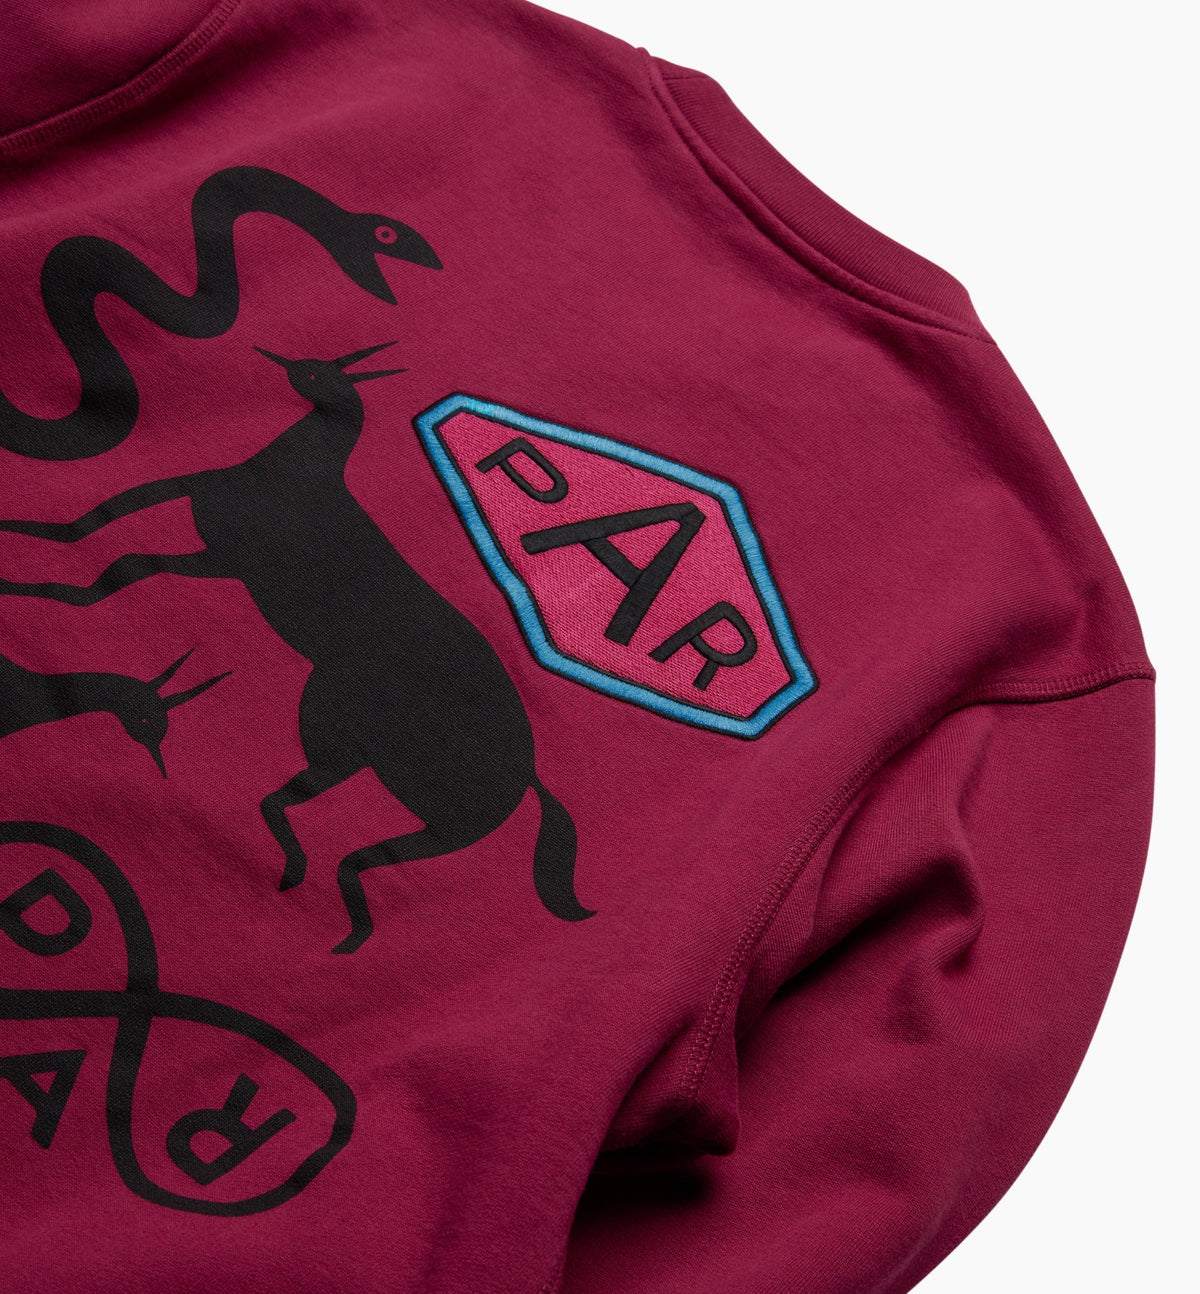 BY PARRA SNAKED BY A HORSE CREW NECK SWEATSHIRT